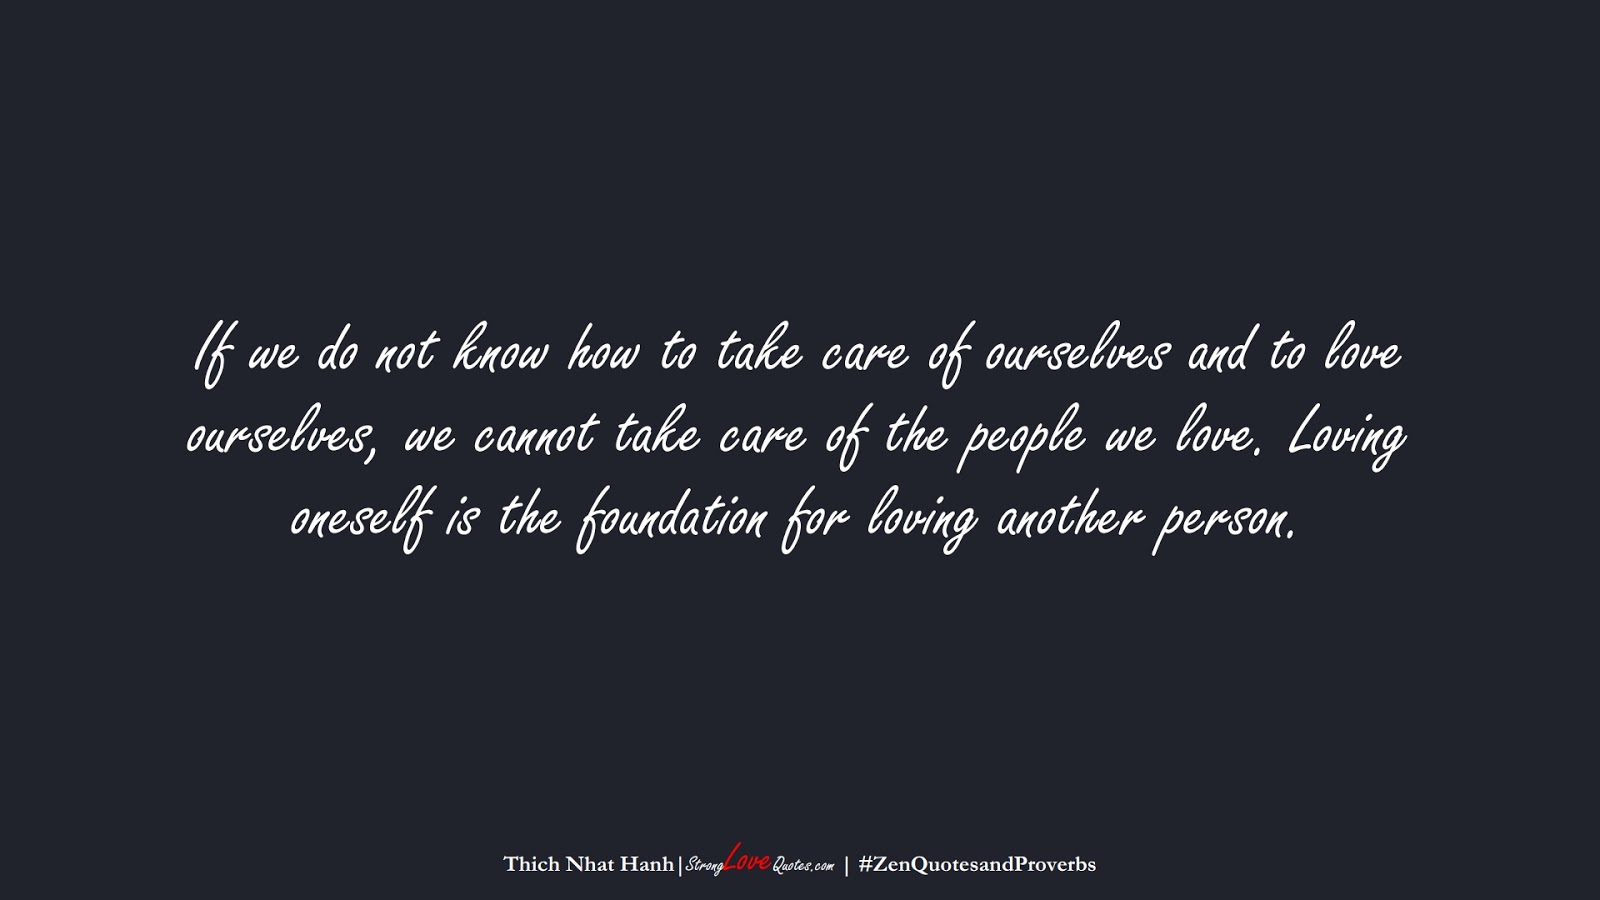 If we do not know how to take care of ourselves and to love ourselves, we cannot take care of the people we love. Loving oneself is the foundation for loving another person. (Thich Nhat Hanh);  #ZenQuotesandProverbs